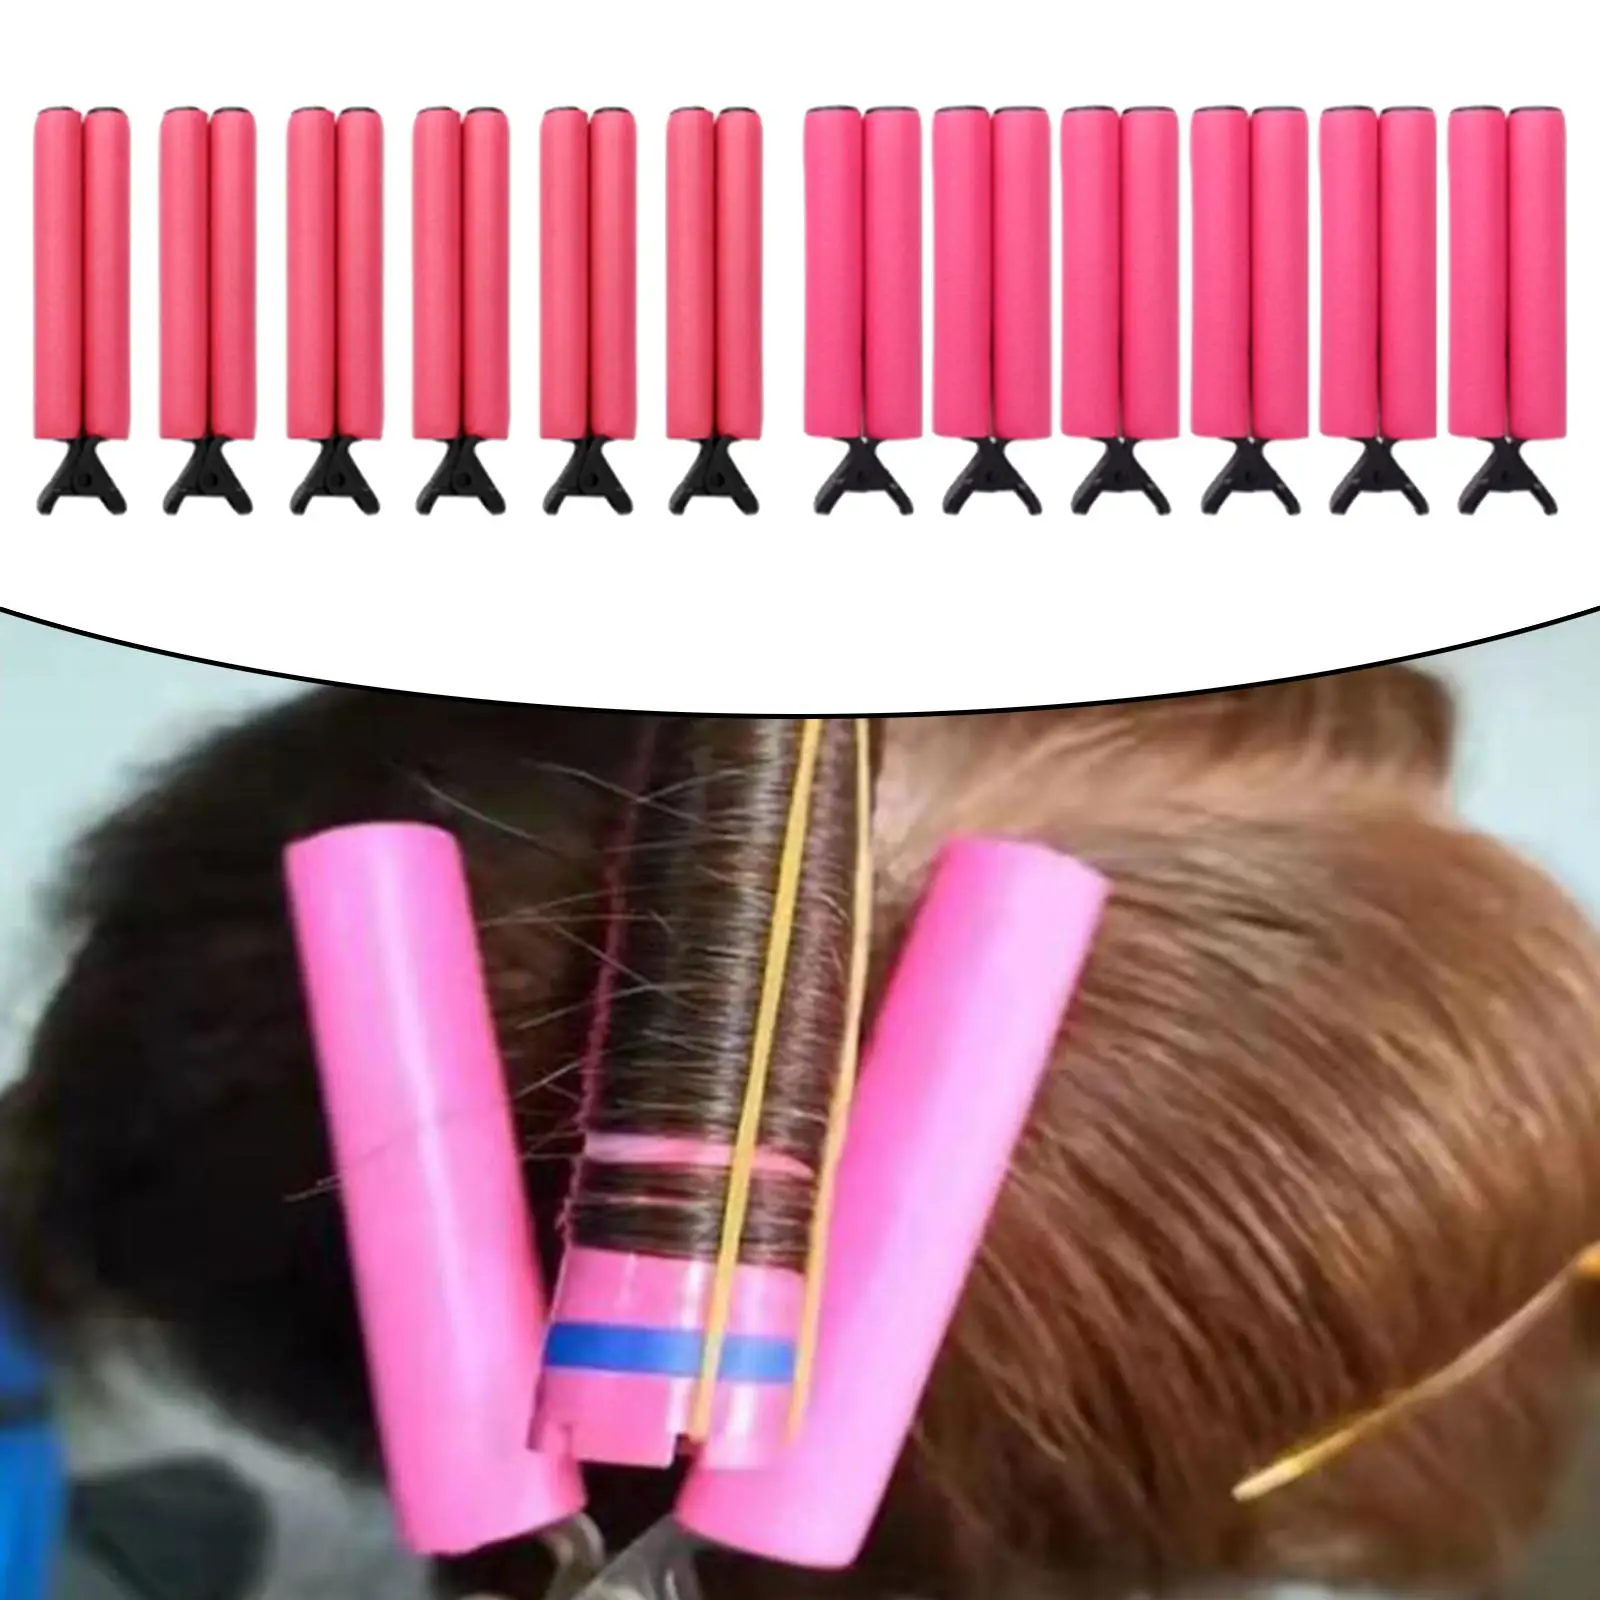 12 Pieces Heat Insulation Clip, Hairdressing Tool Perm Fixing Sponge Clips, for Household Barber Shop Beauty Salon Stylist Women